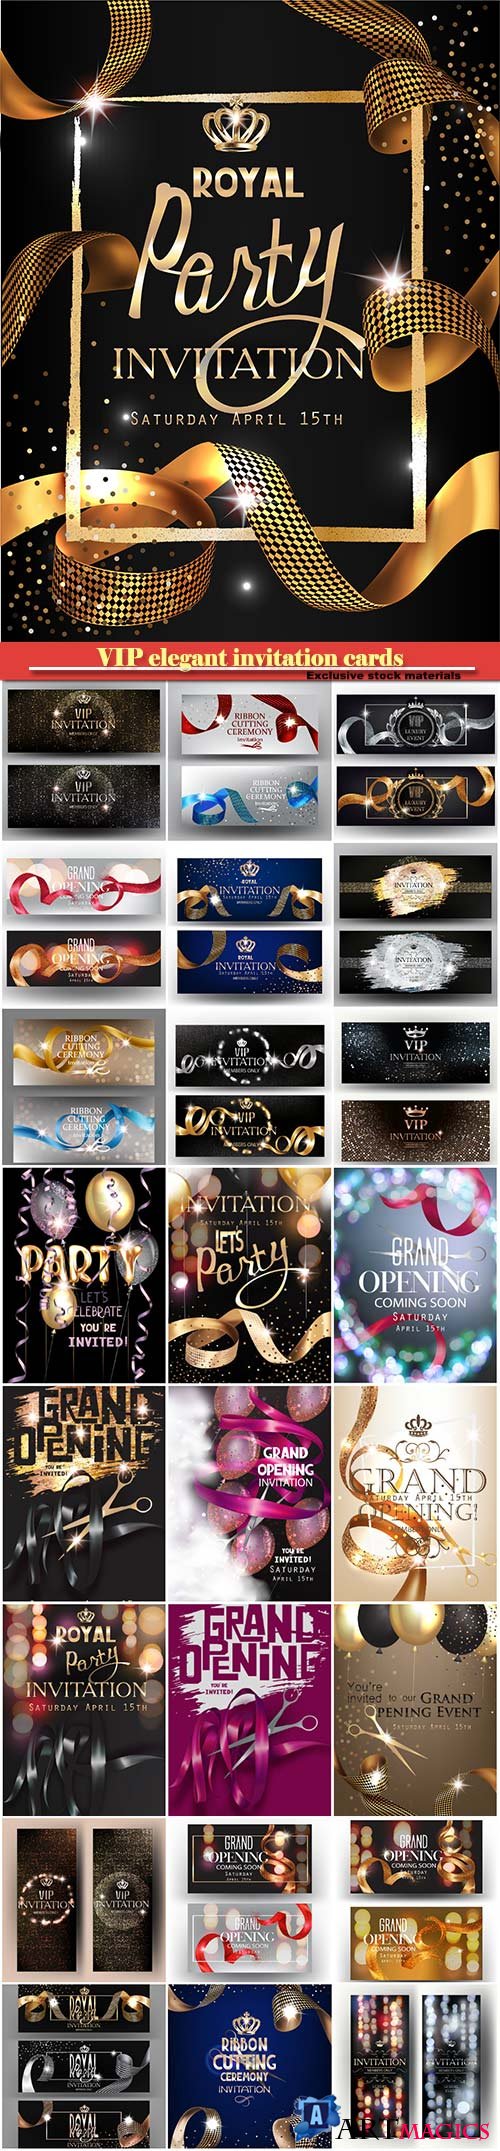 VIP elegant invitation cards with with defocused lights, air balloons and gold curly ribbon